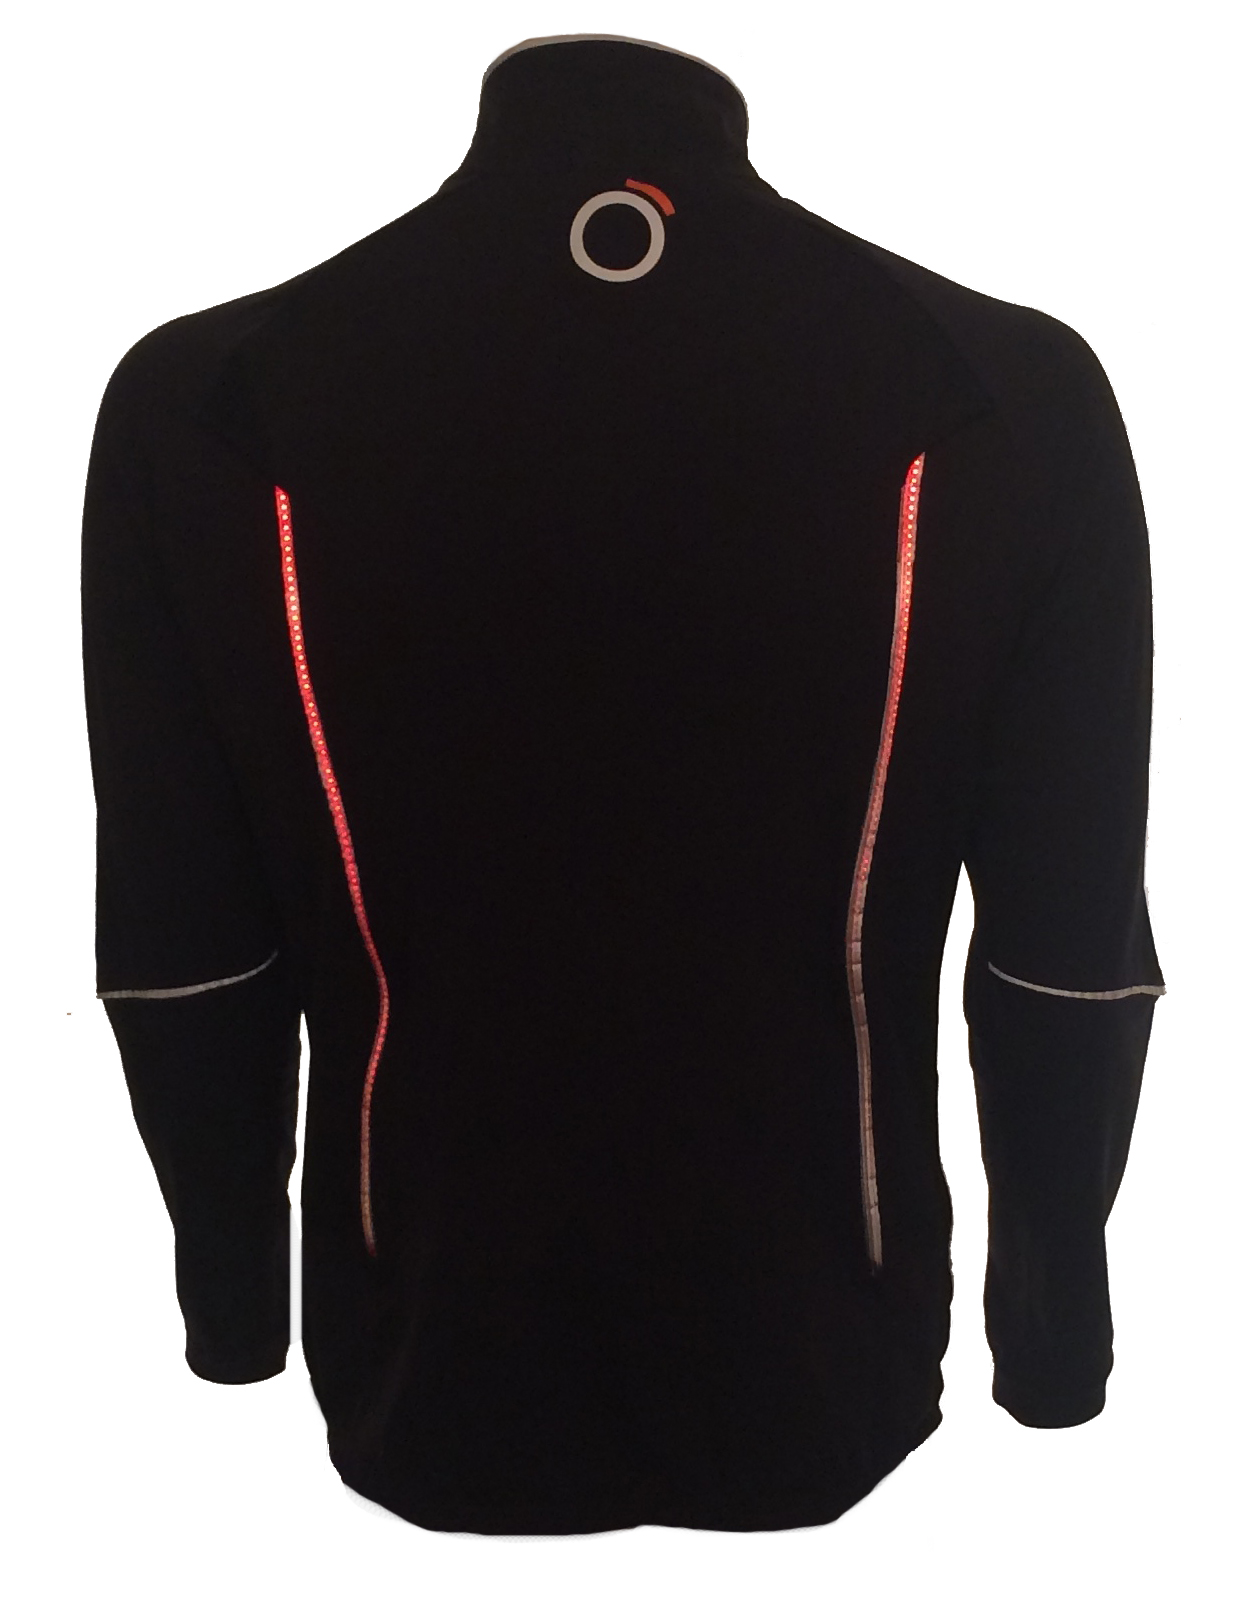 Glofaster, will launch its revolutionary cycling jacket. © Glofaster 